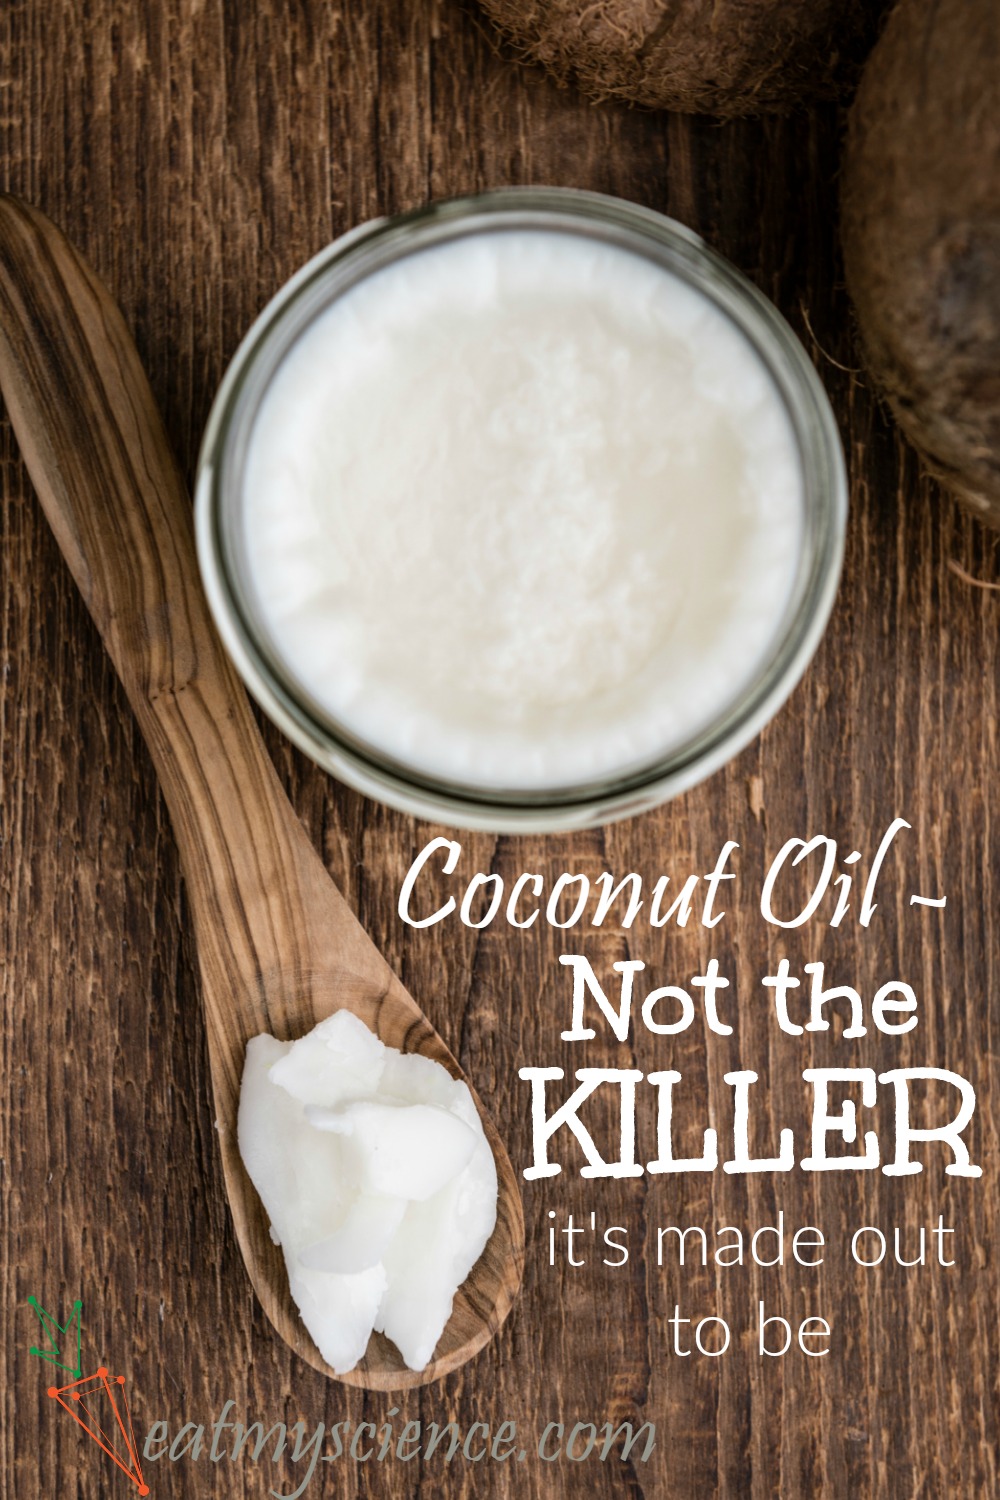 Coconut Oil - Not the Killer It's Made Out to Be. Coconut is full of saturated fats, yes, but saturated fats are not inherently bad. Coconut oil still has tons of health benefits